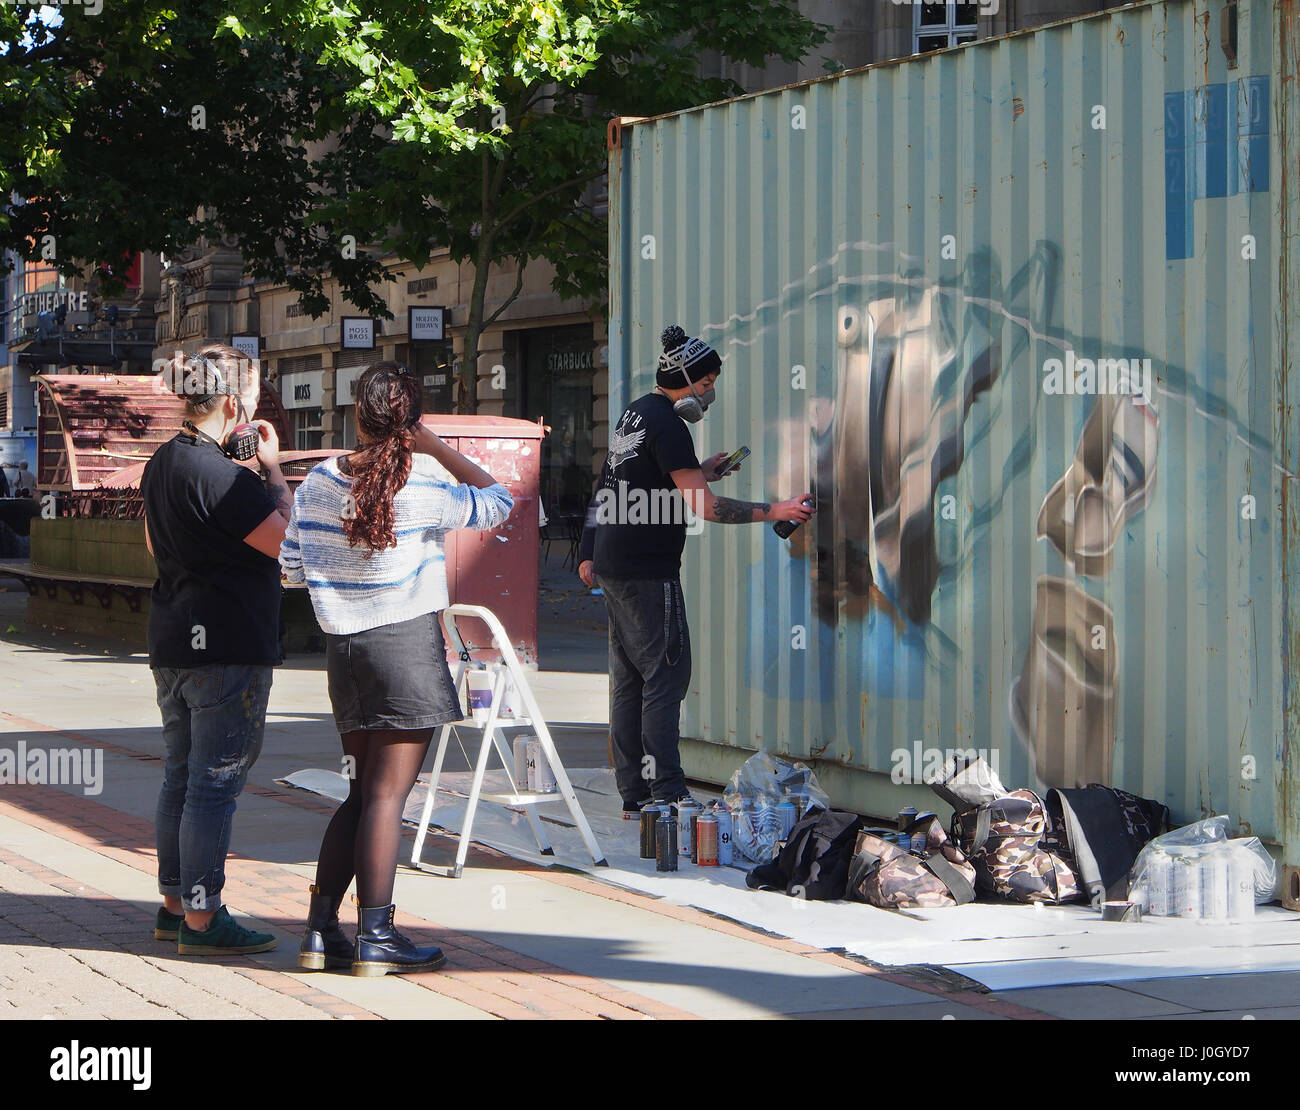 Legal graffitti, grafitti, graffiti, a young man gives a demonstration of painting with spray paint on a container in St. Anne's Square in Manchester, Stock Photo